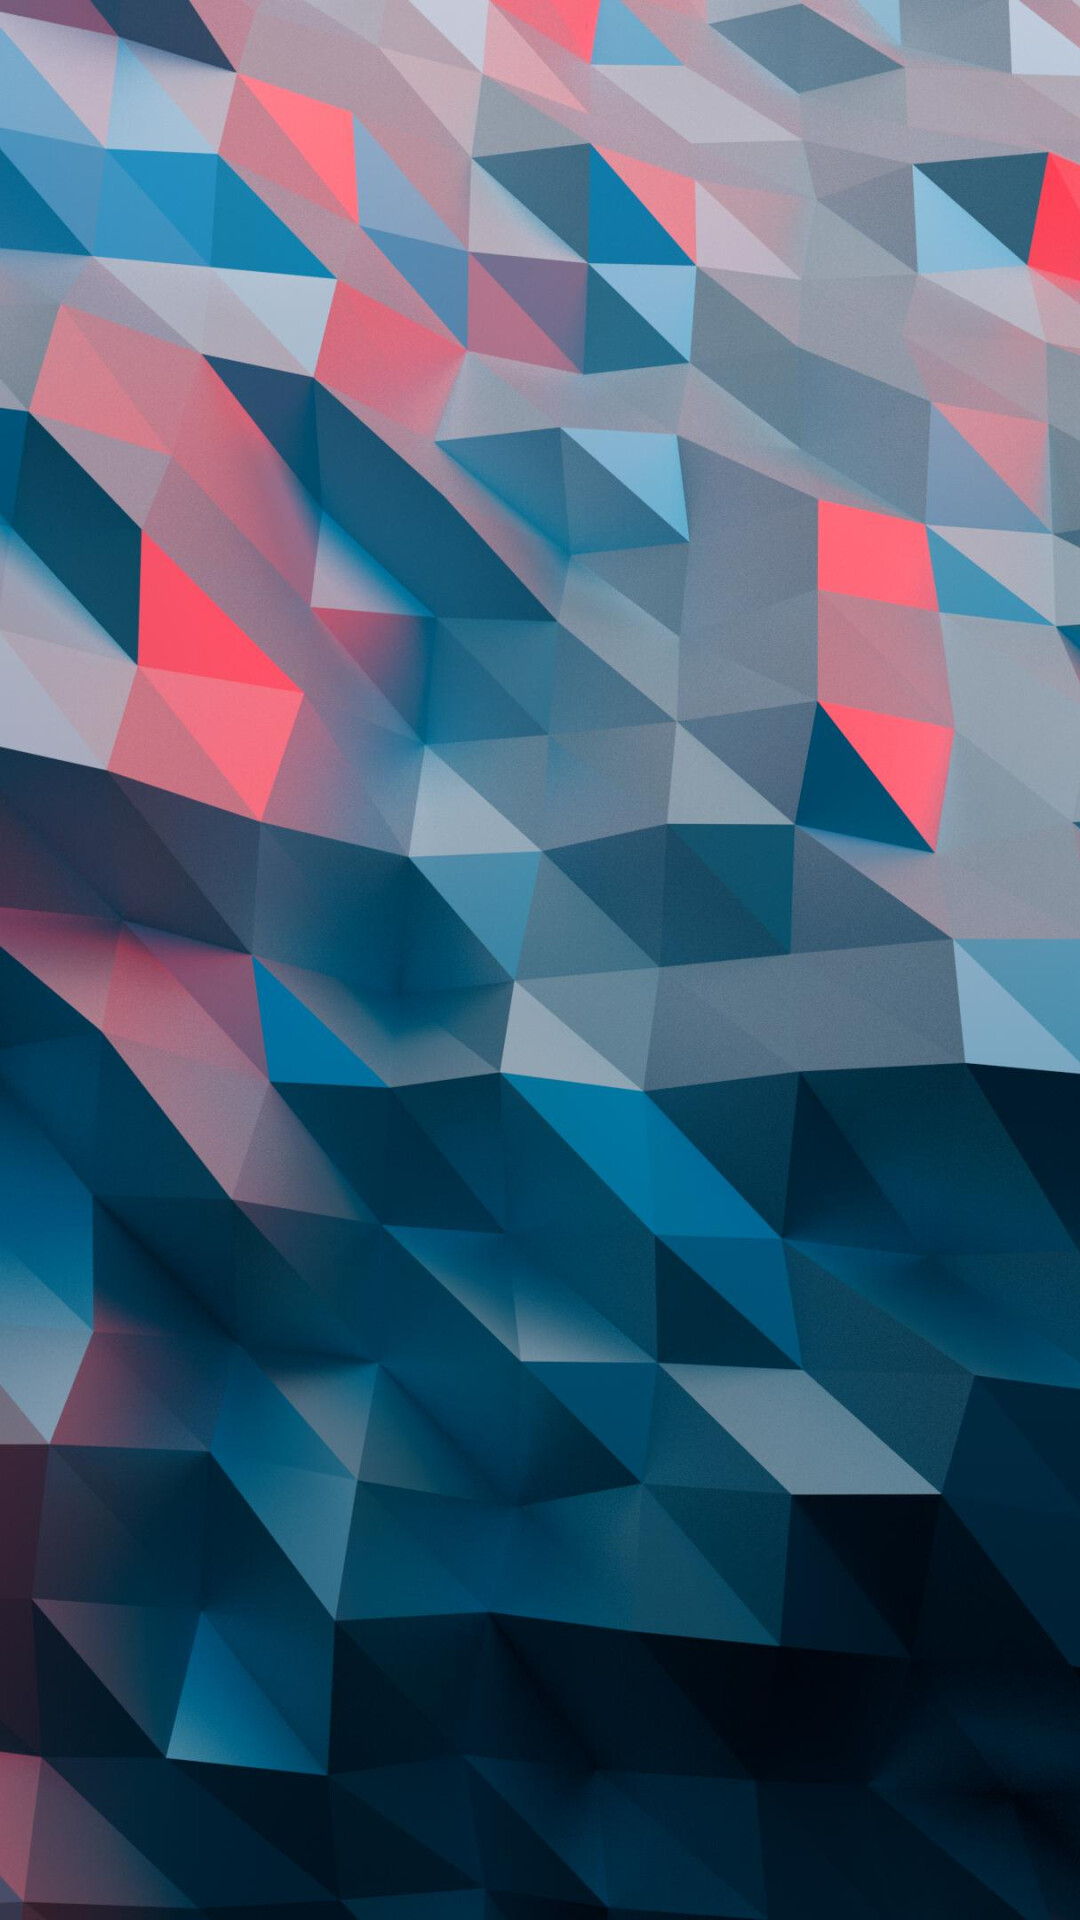 Geometric Abstract: Hexagons, Parallelograms, Acute angles, Trapezoids. 1080x1920 Full HD Wallpaper.